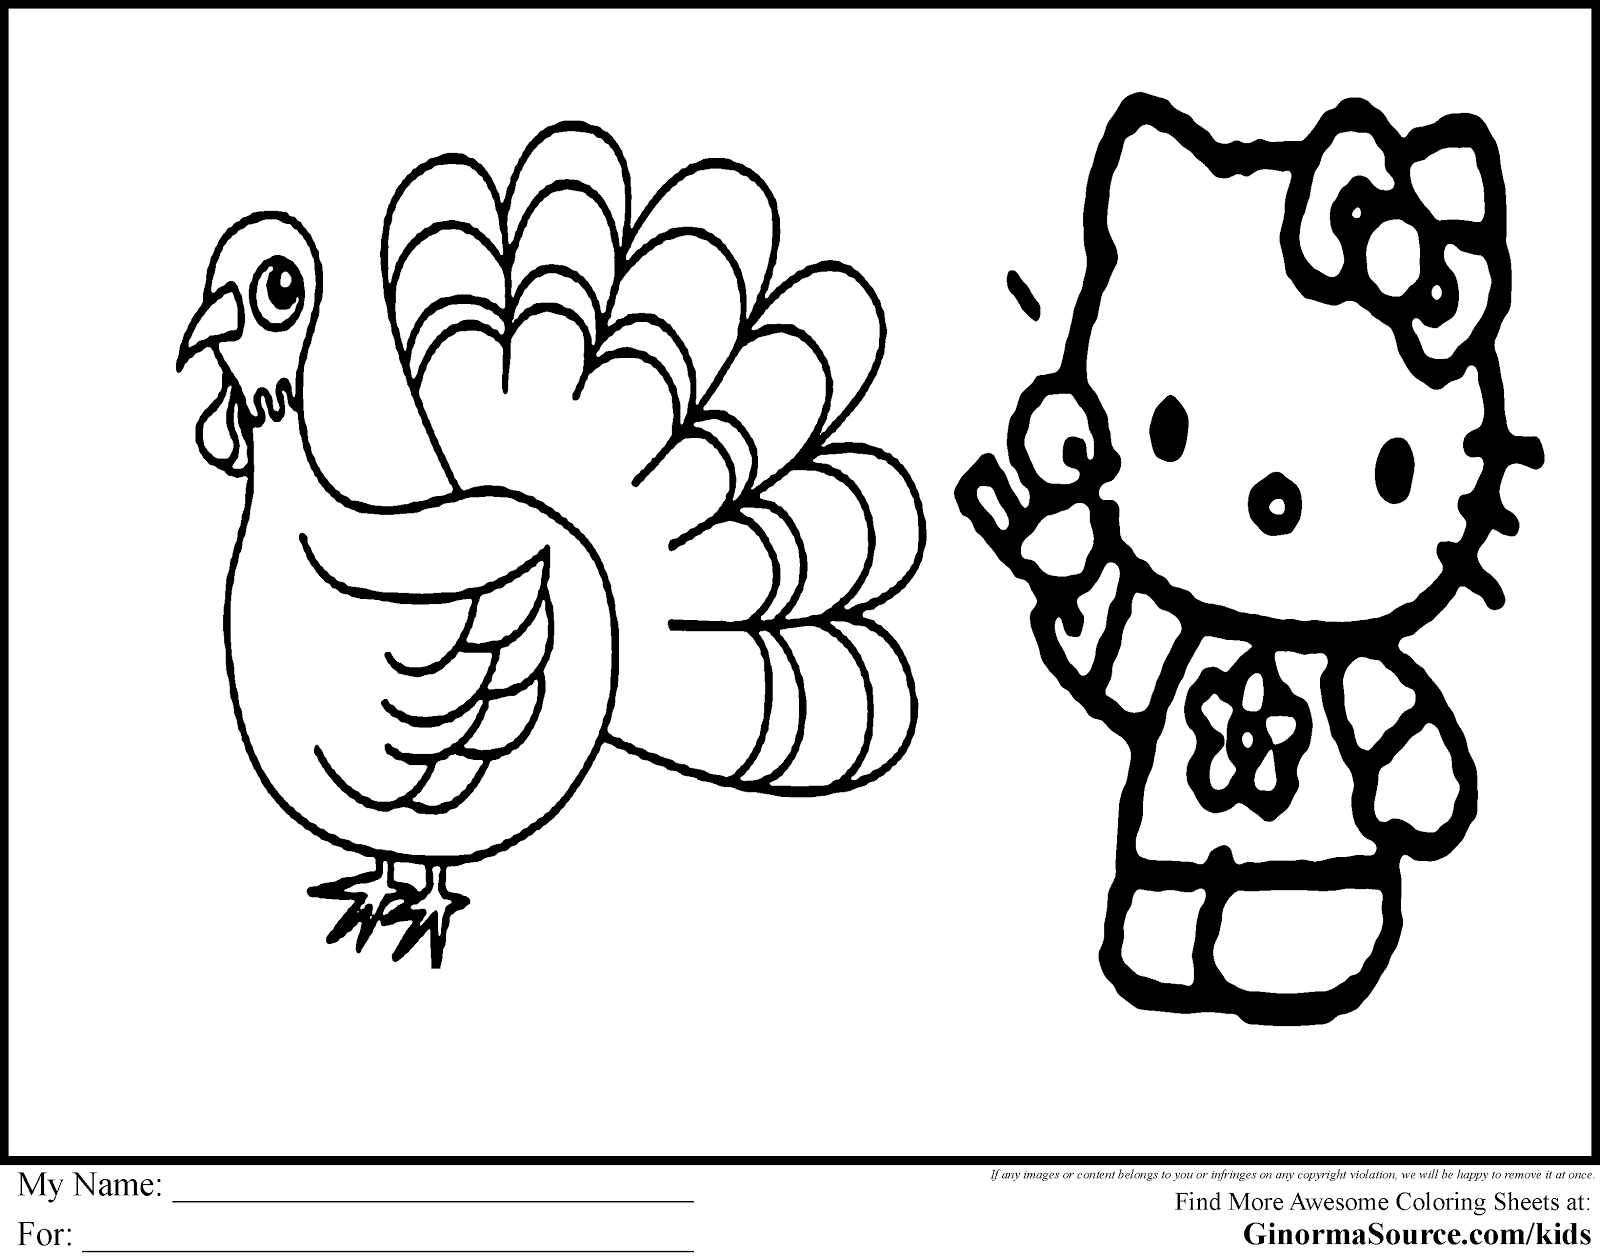 Free Downloadable Thanksgiving Coloring Sheets